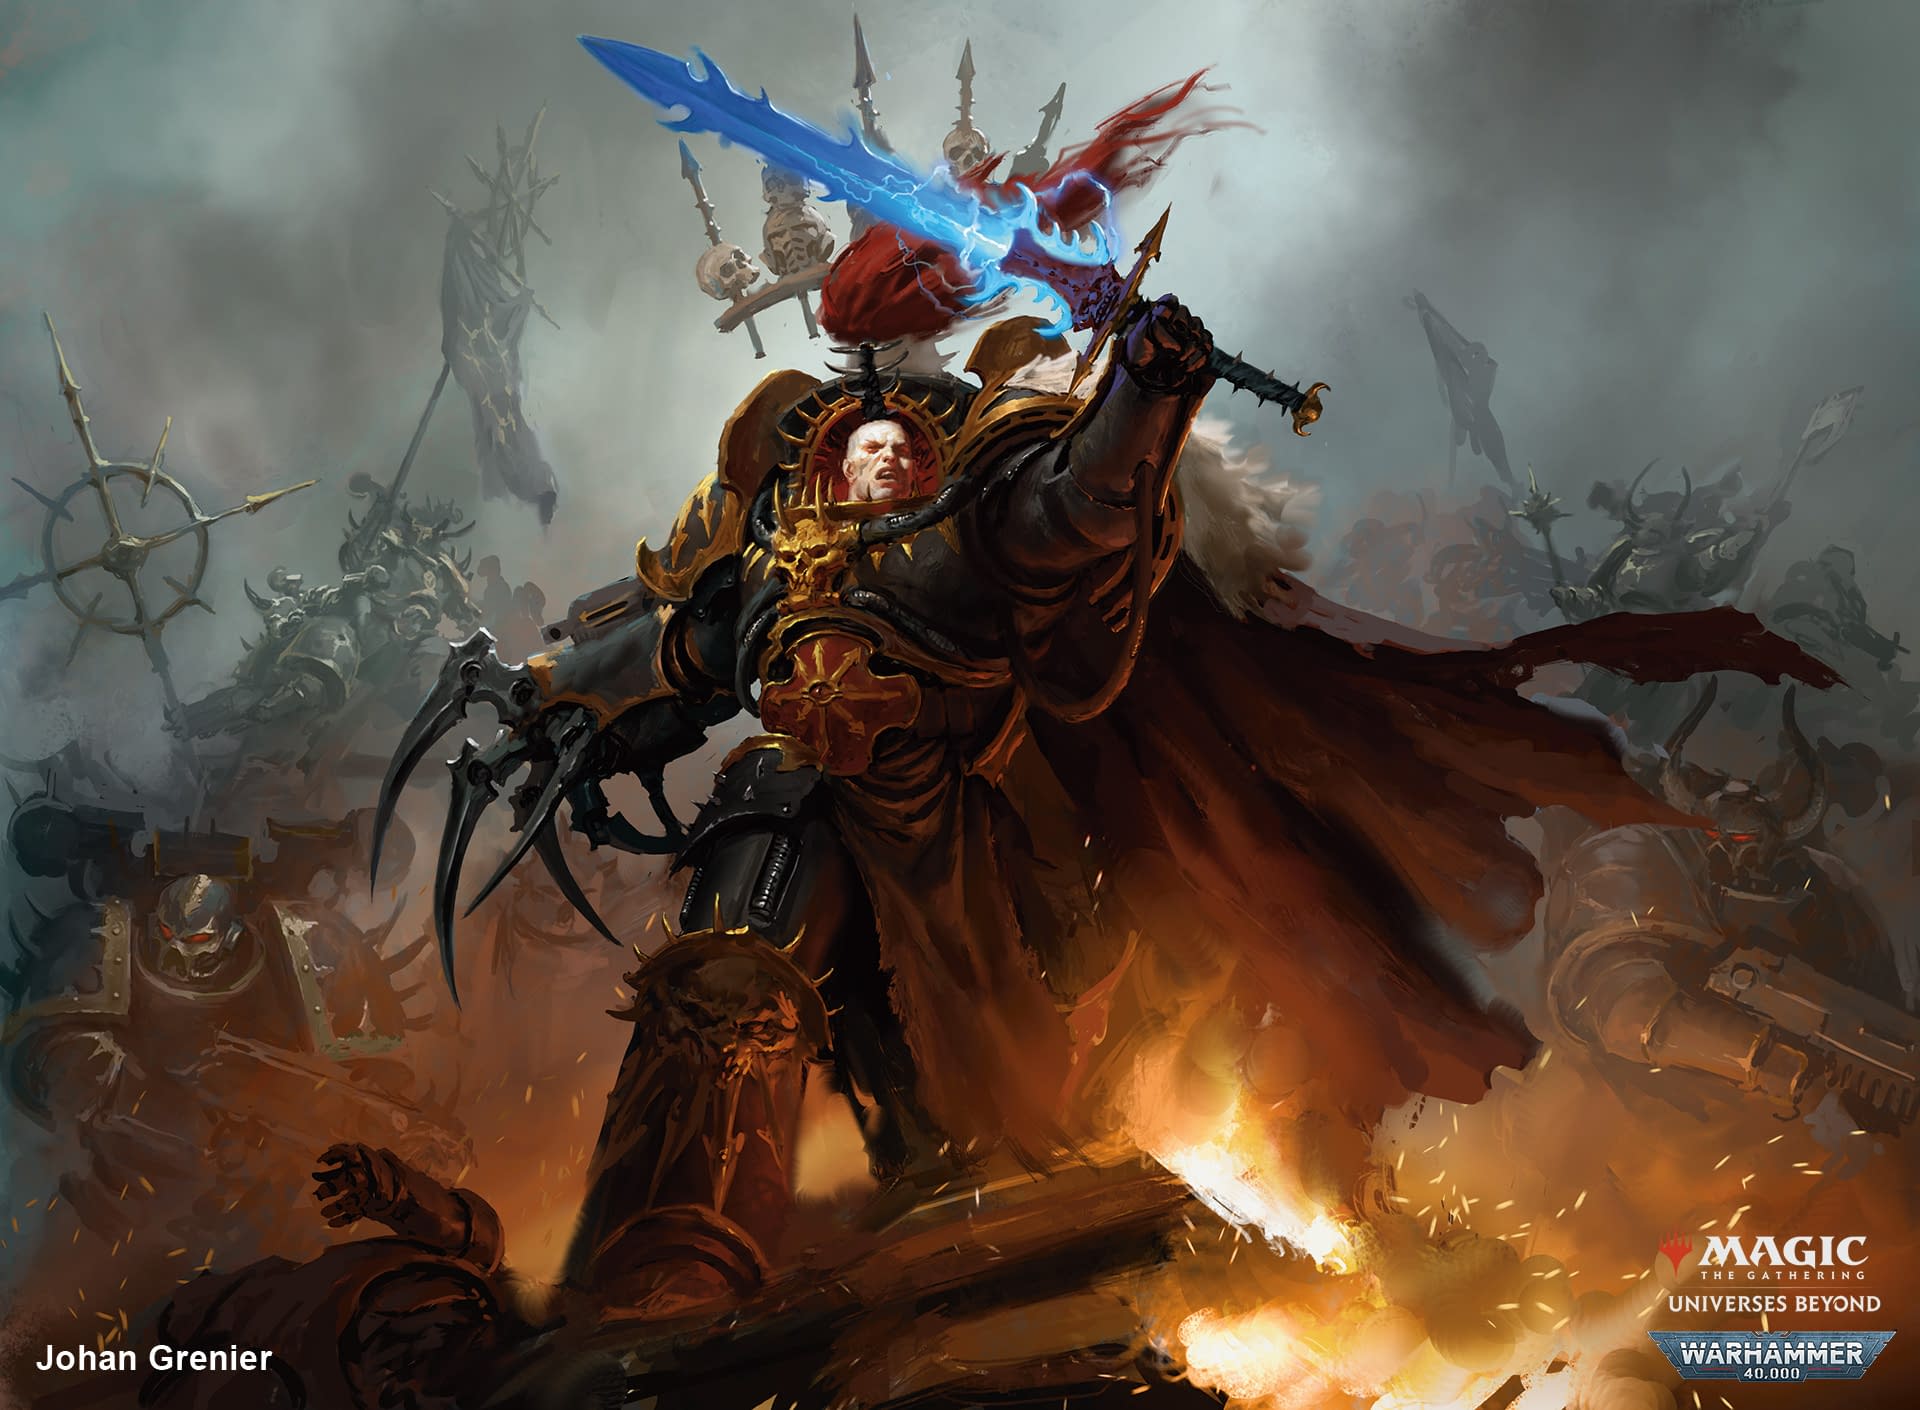 Magic: The Gathering Warhammer 40,000 Commanders Have Potential